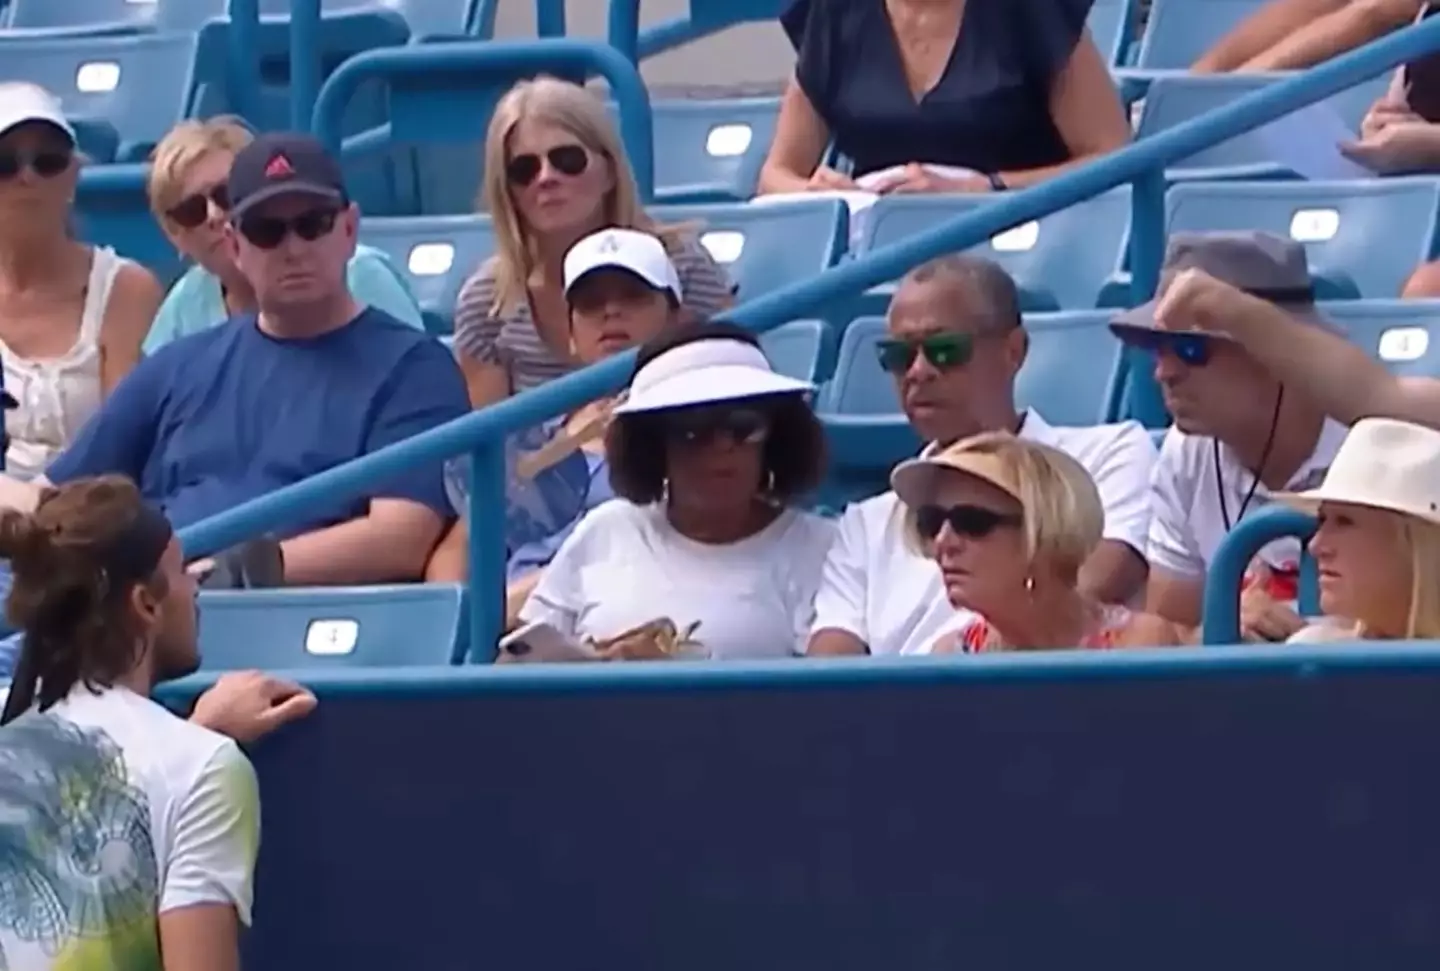 Tsitsipas went over to the crowd to ask who was pretending to be a bee, and some pointed out the offending buzzer.